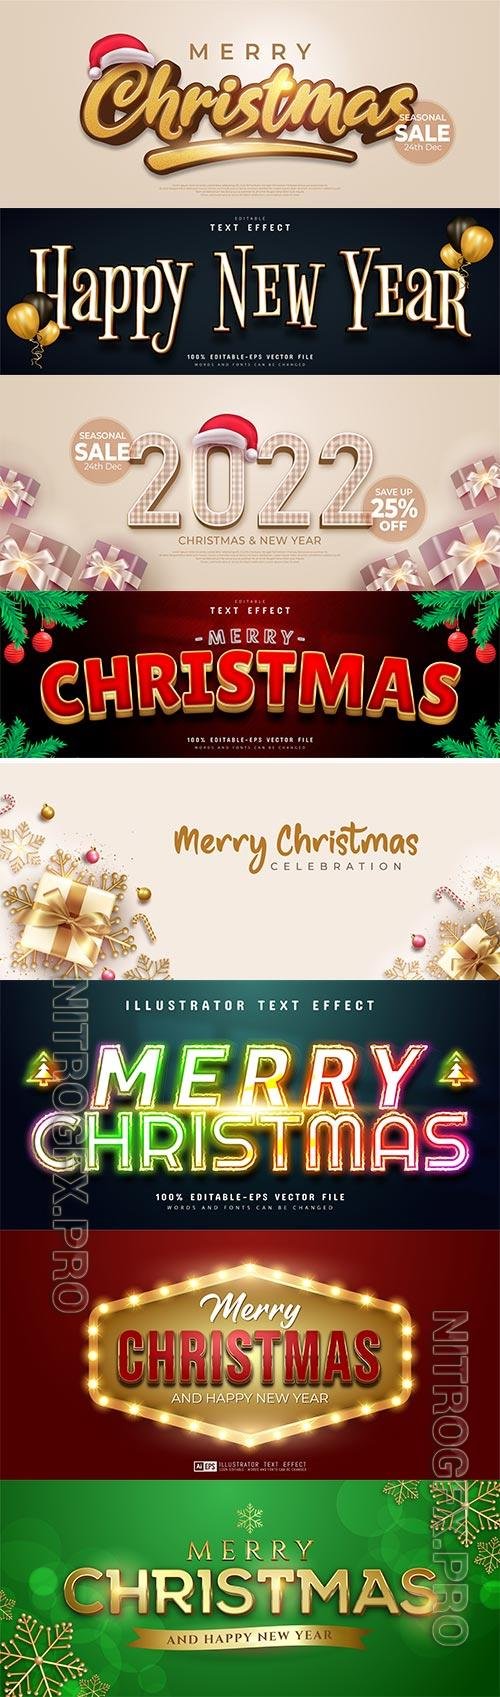 Merry christmas banner with golden christmas element decoration premium vector